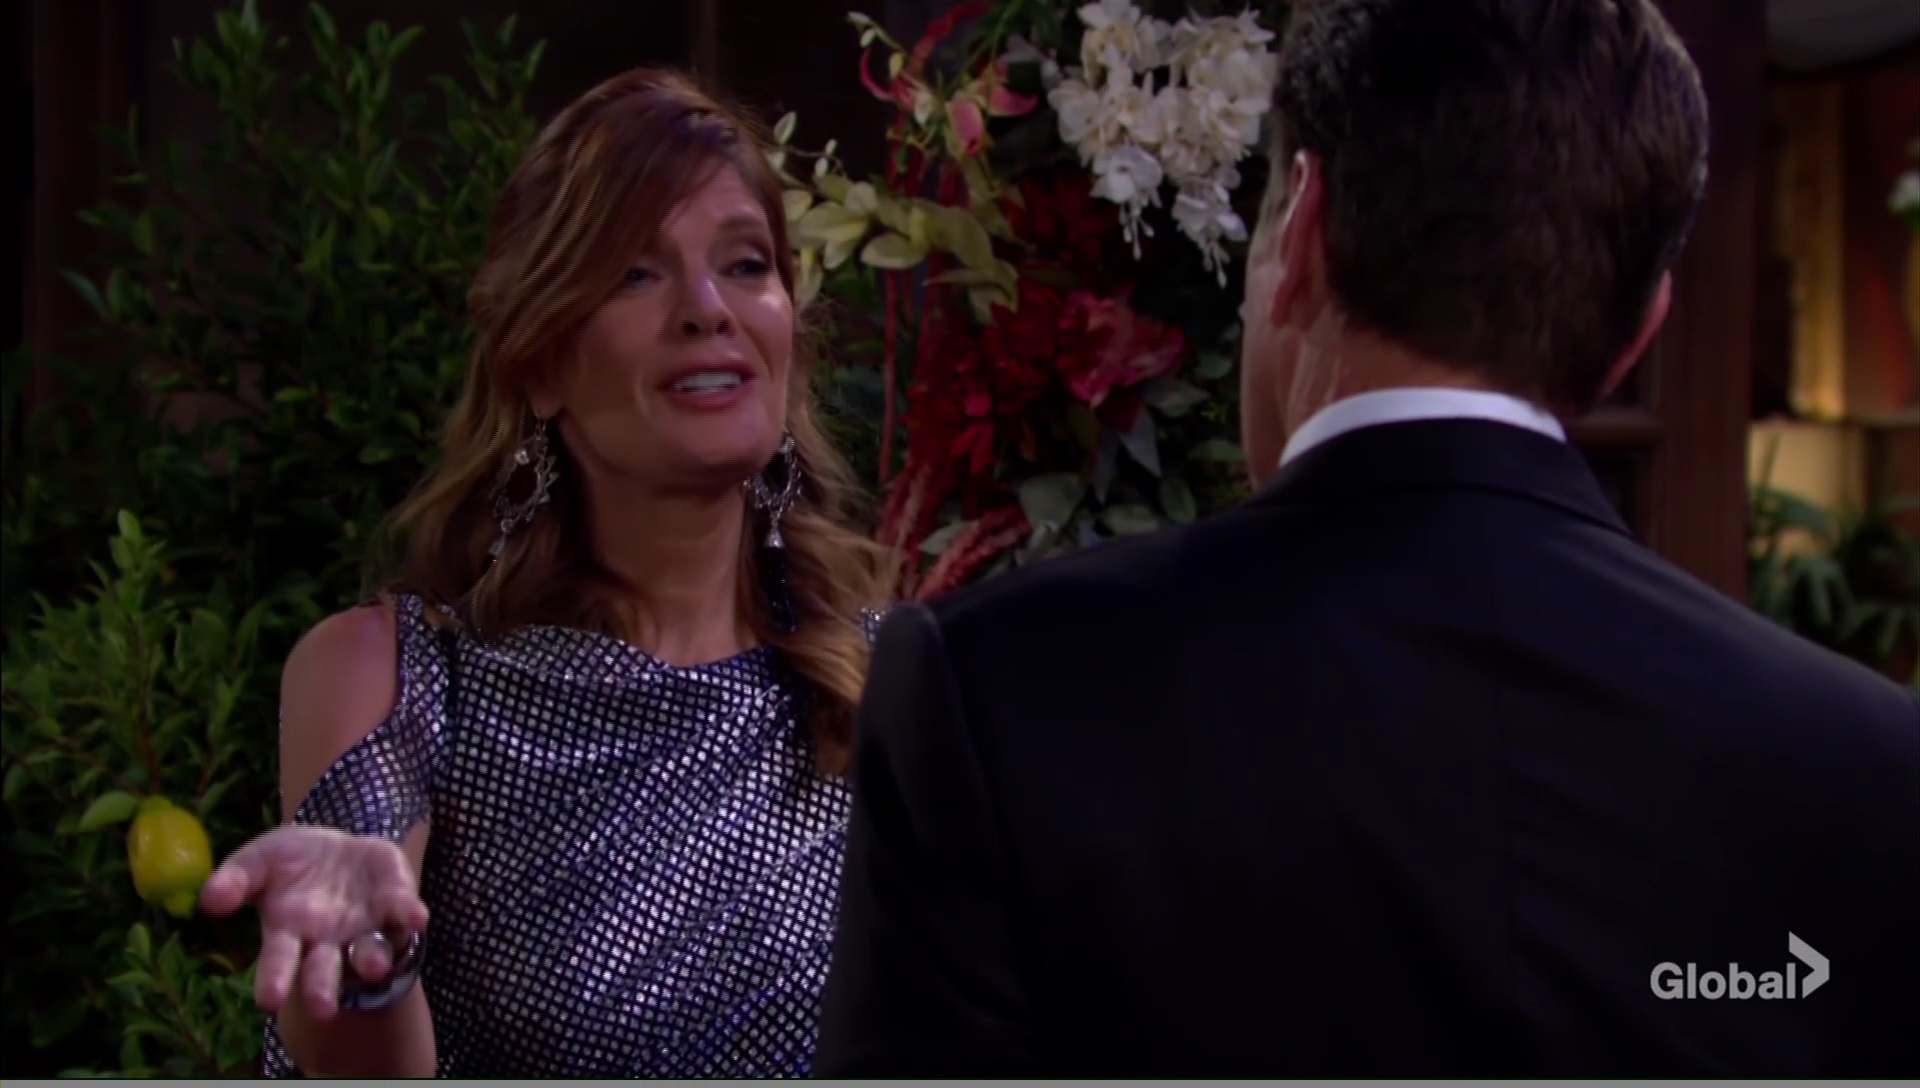 phyllis hates victoria young restless